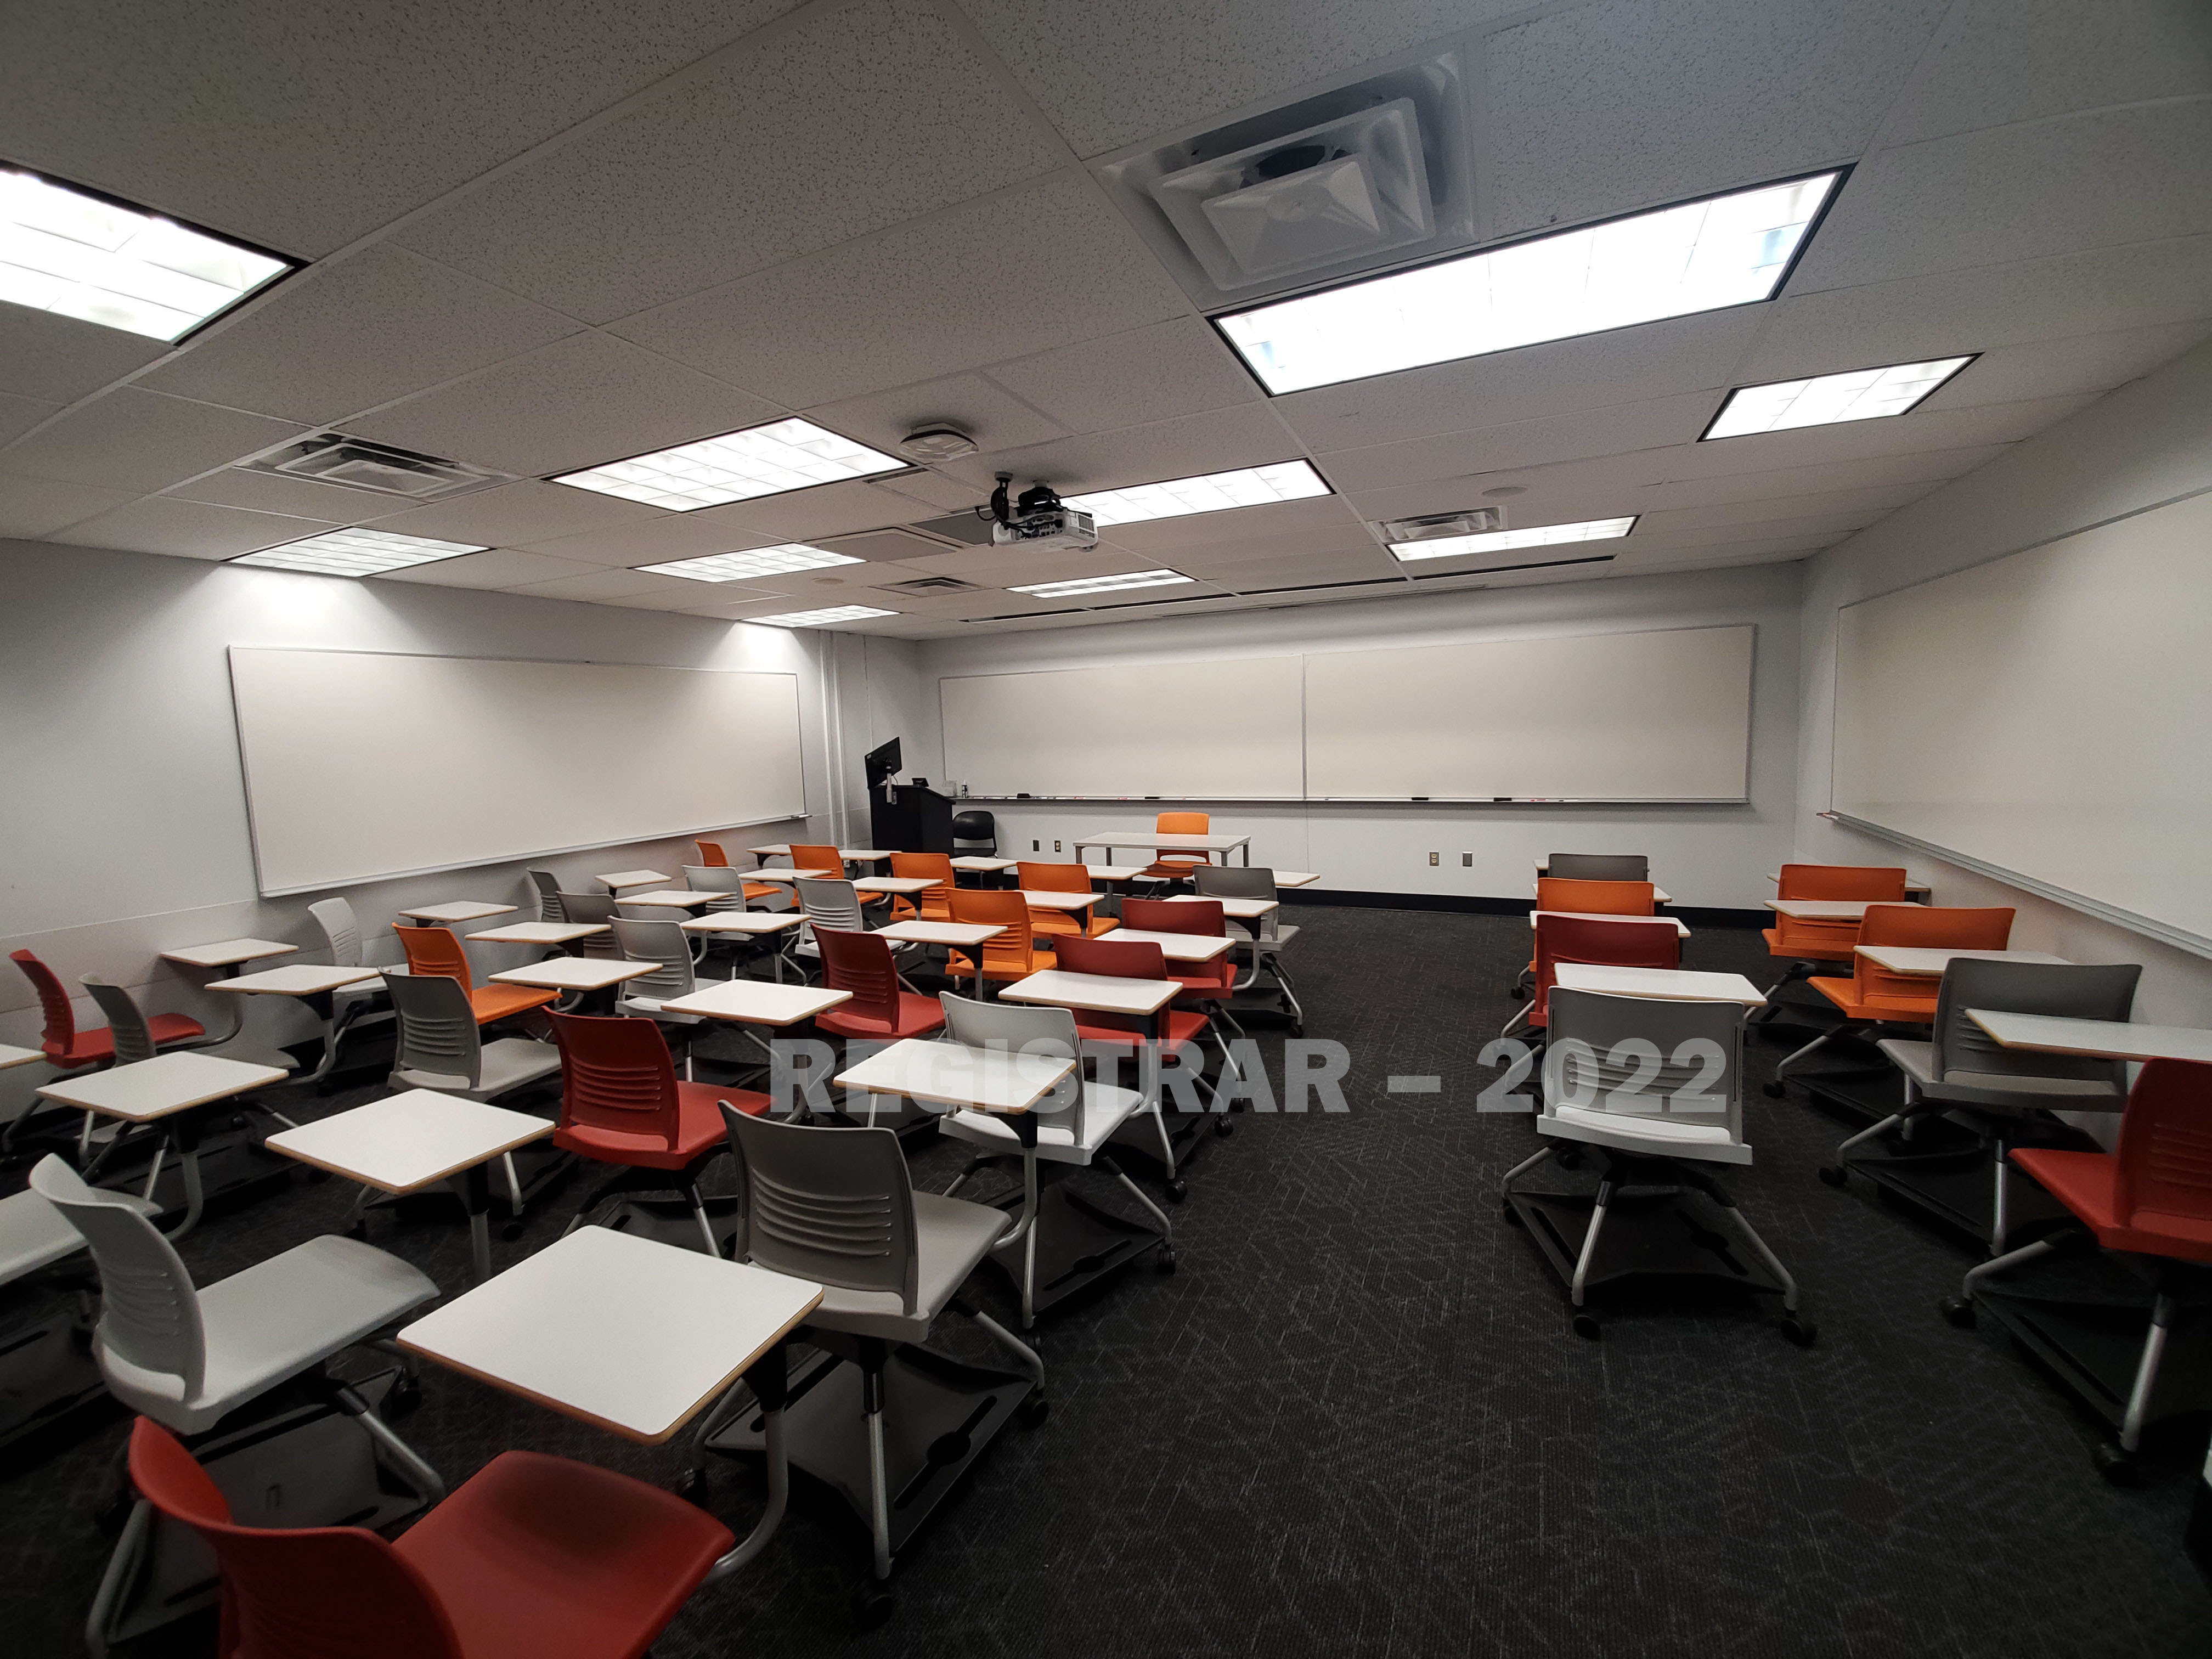 Journalism Building room 274 ultra wide angle view from the back of the room